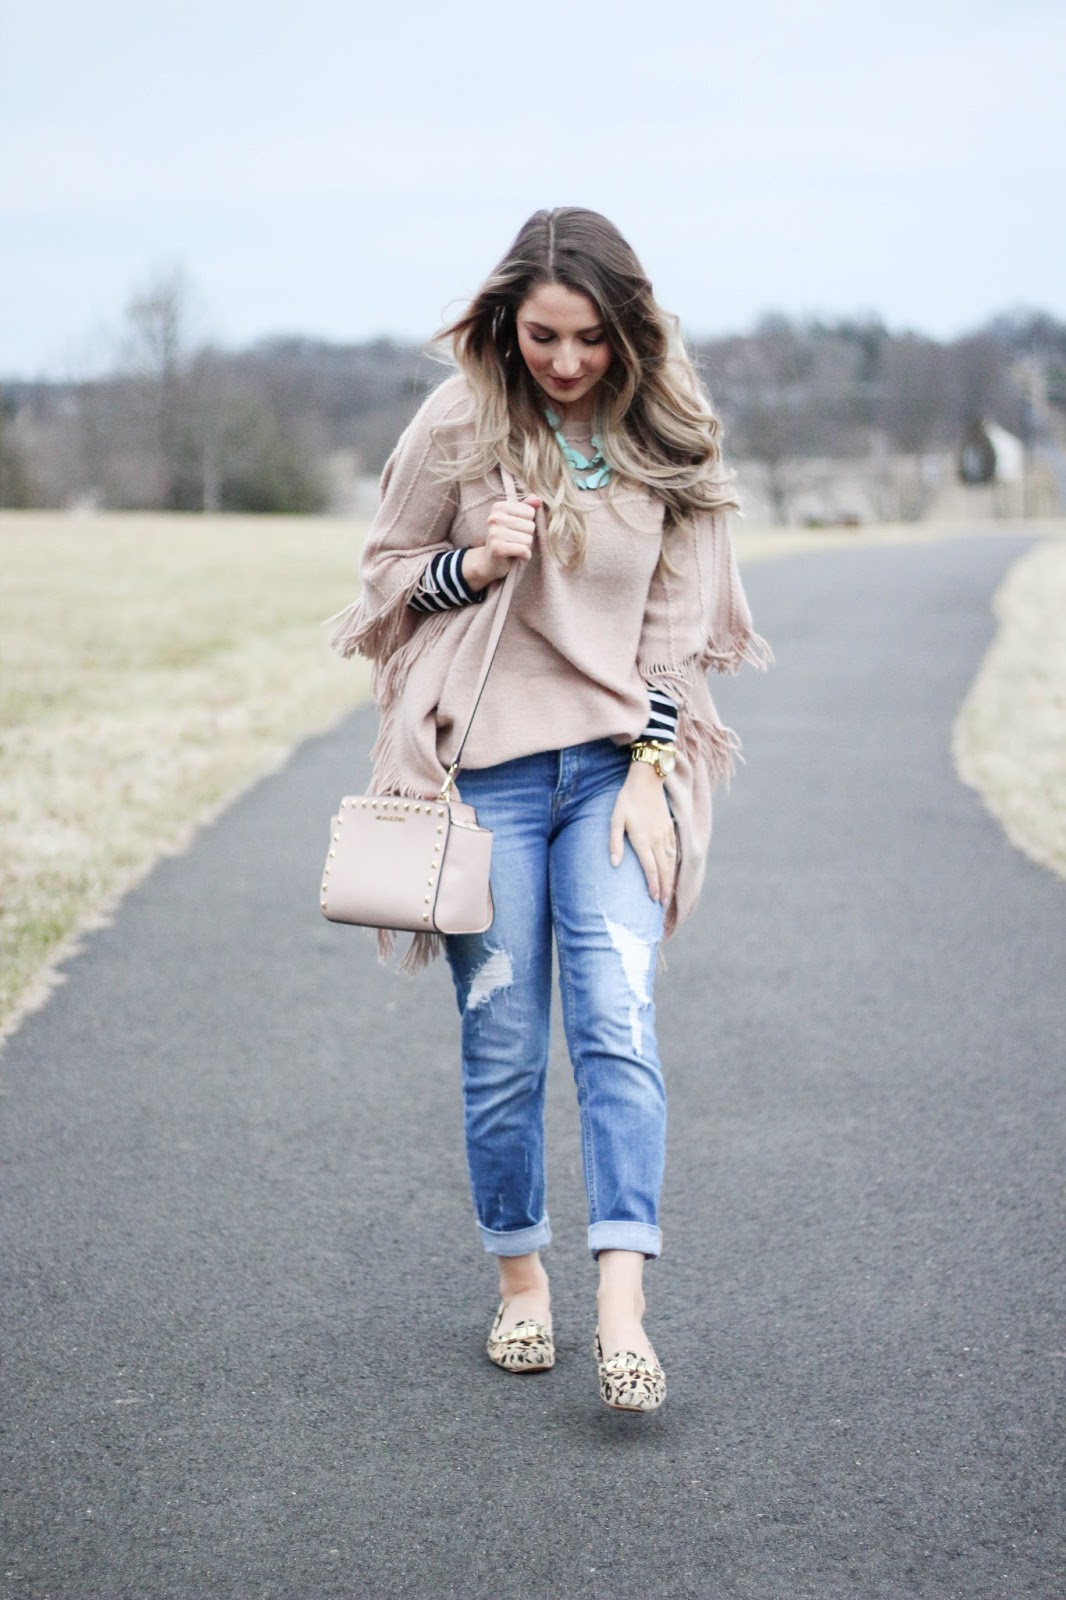 WINTER TO SPRING TRANSITION OUTFIT | A Classy Fashionista